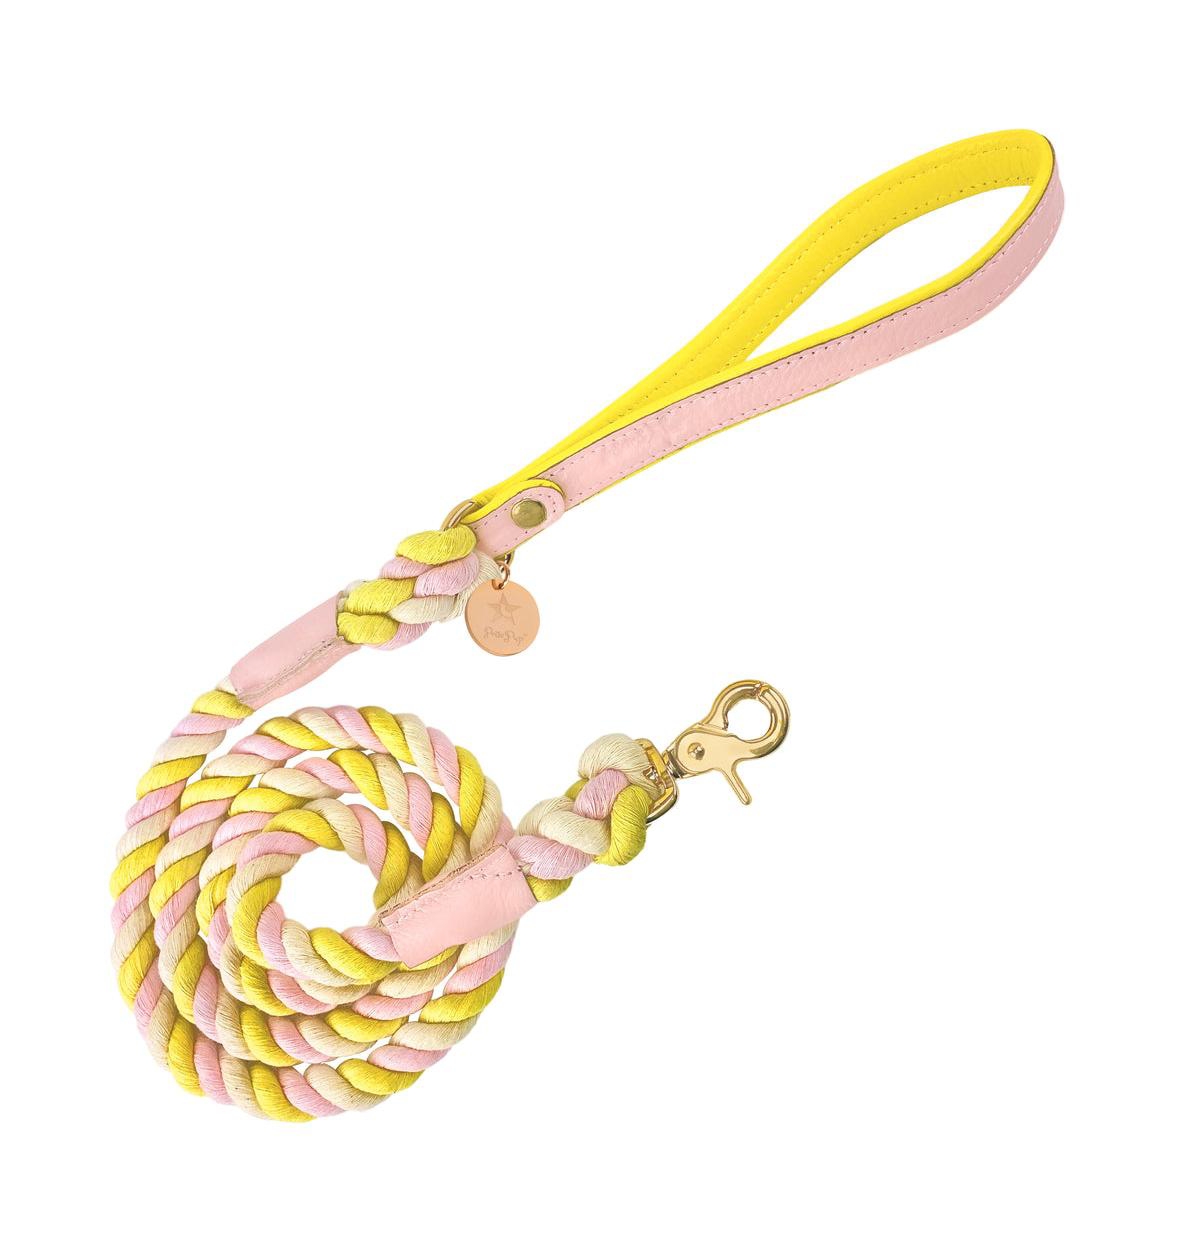 Pet Dog 5ft Long Leash - Sweetest Thing - Sweetest thing